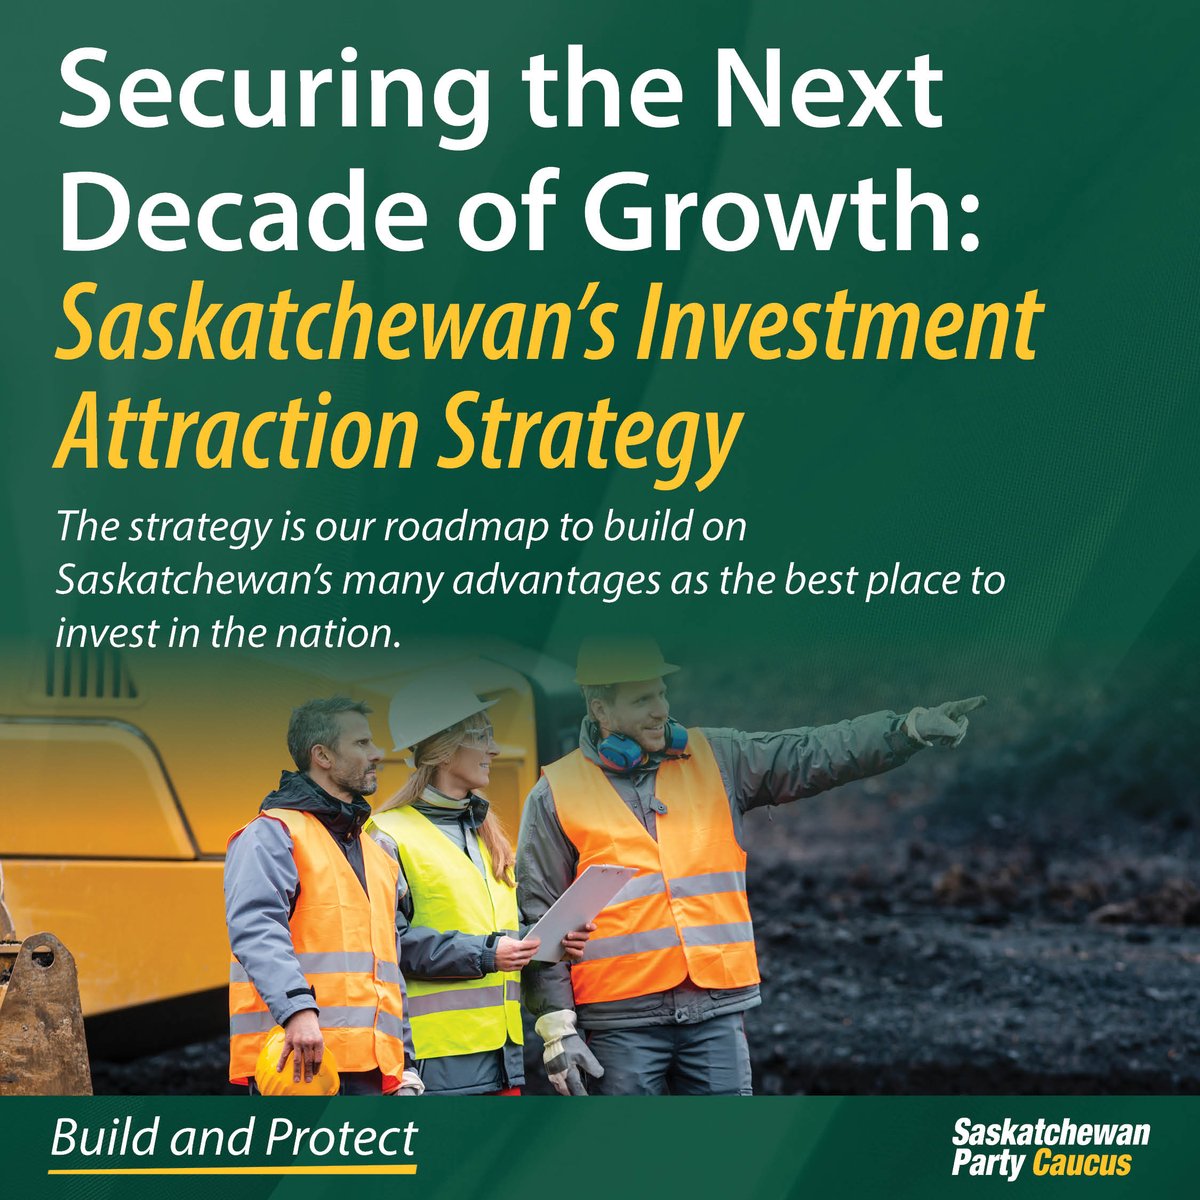 Saskatchewan's Investment Attraction Strategy will lead to more opportunities for local, national and international investors, while solidifying our province as a nation leader in private capital investment.